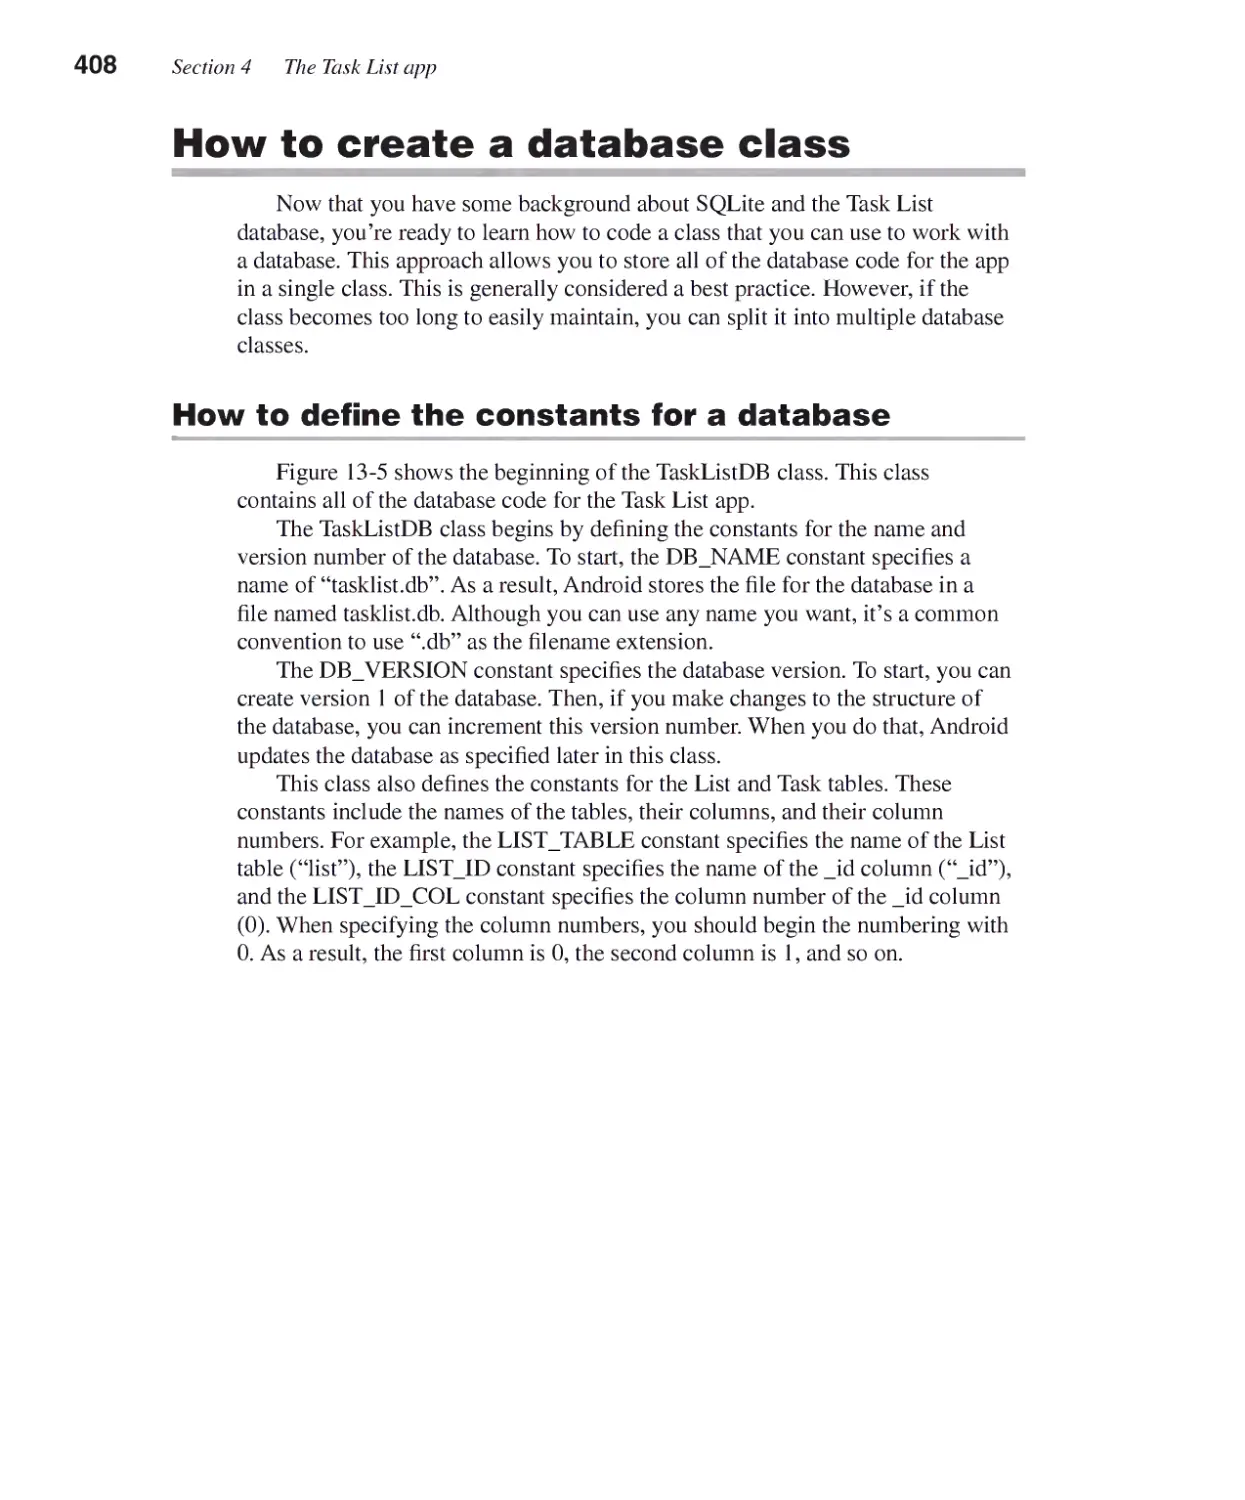 How to Create a Database Class